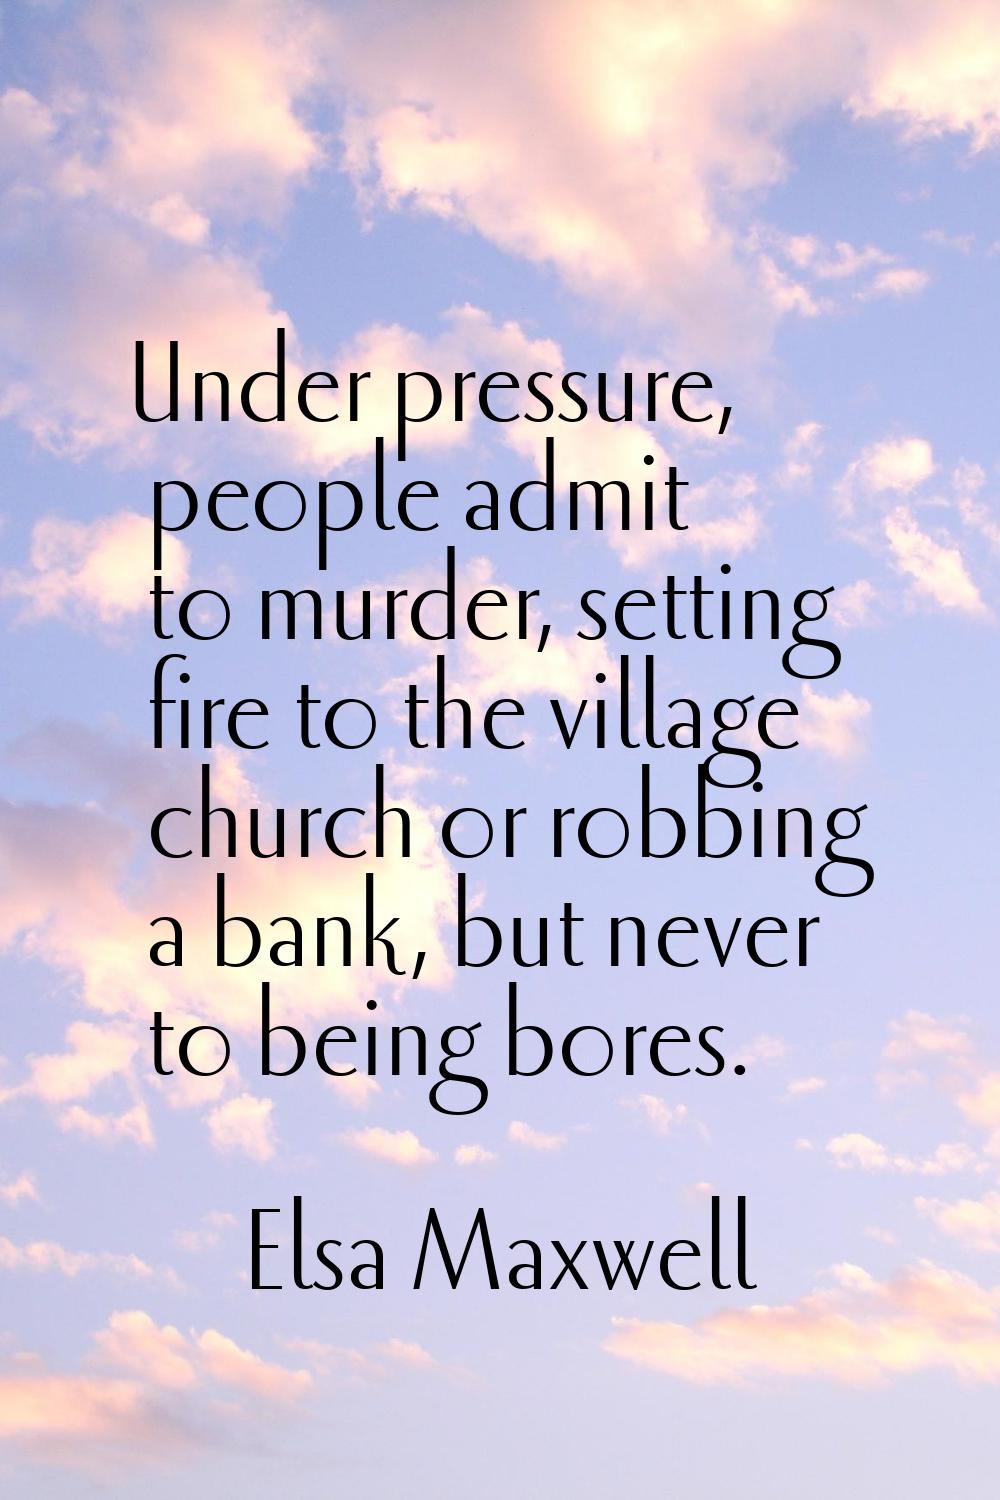 Under pressure, people admit to murder, setting fire to the village church or robbing a bank, but n